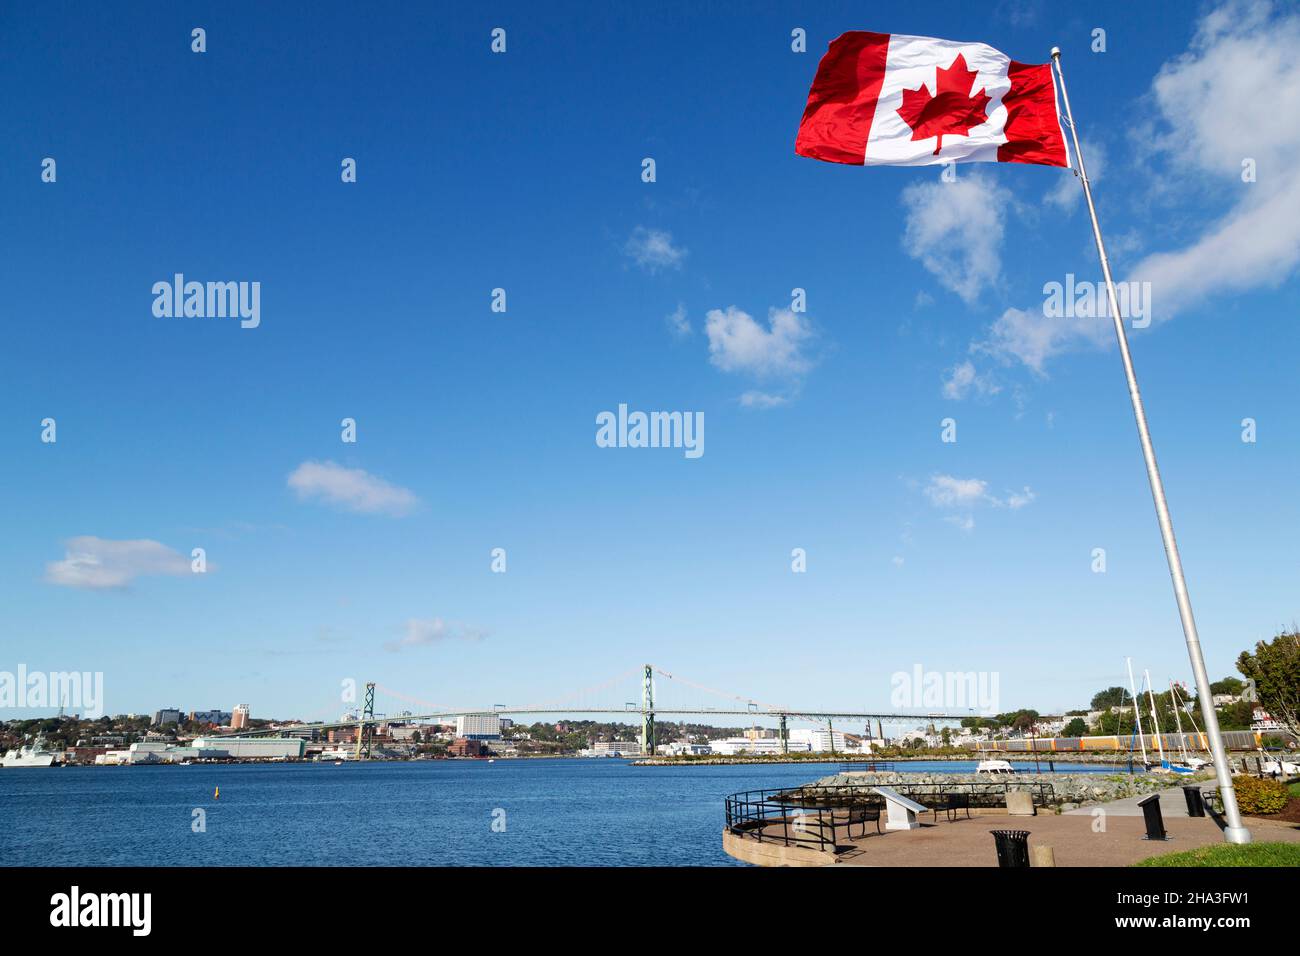 The Canadian flag flies from a flagpole at the Alderney Gate Ferry Terminal (Dartmouth Ferry Terminal) in Nova Scotia, Canada. Stock Photo